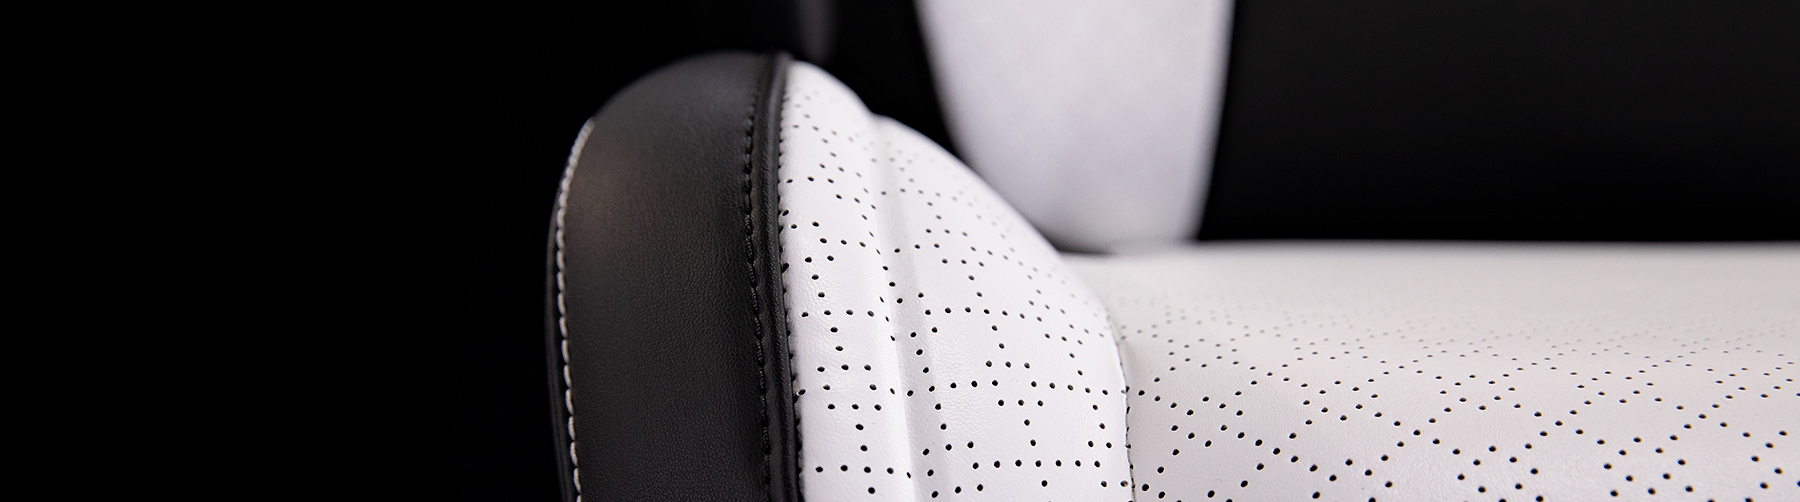 Close up of black and white material used for a car seat